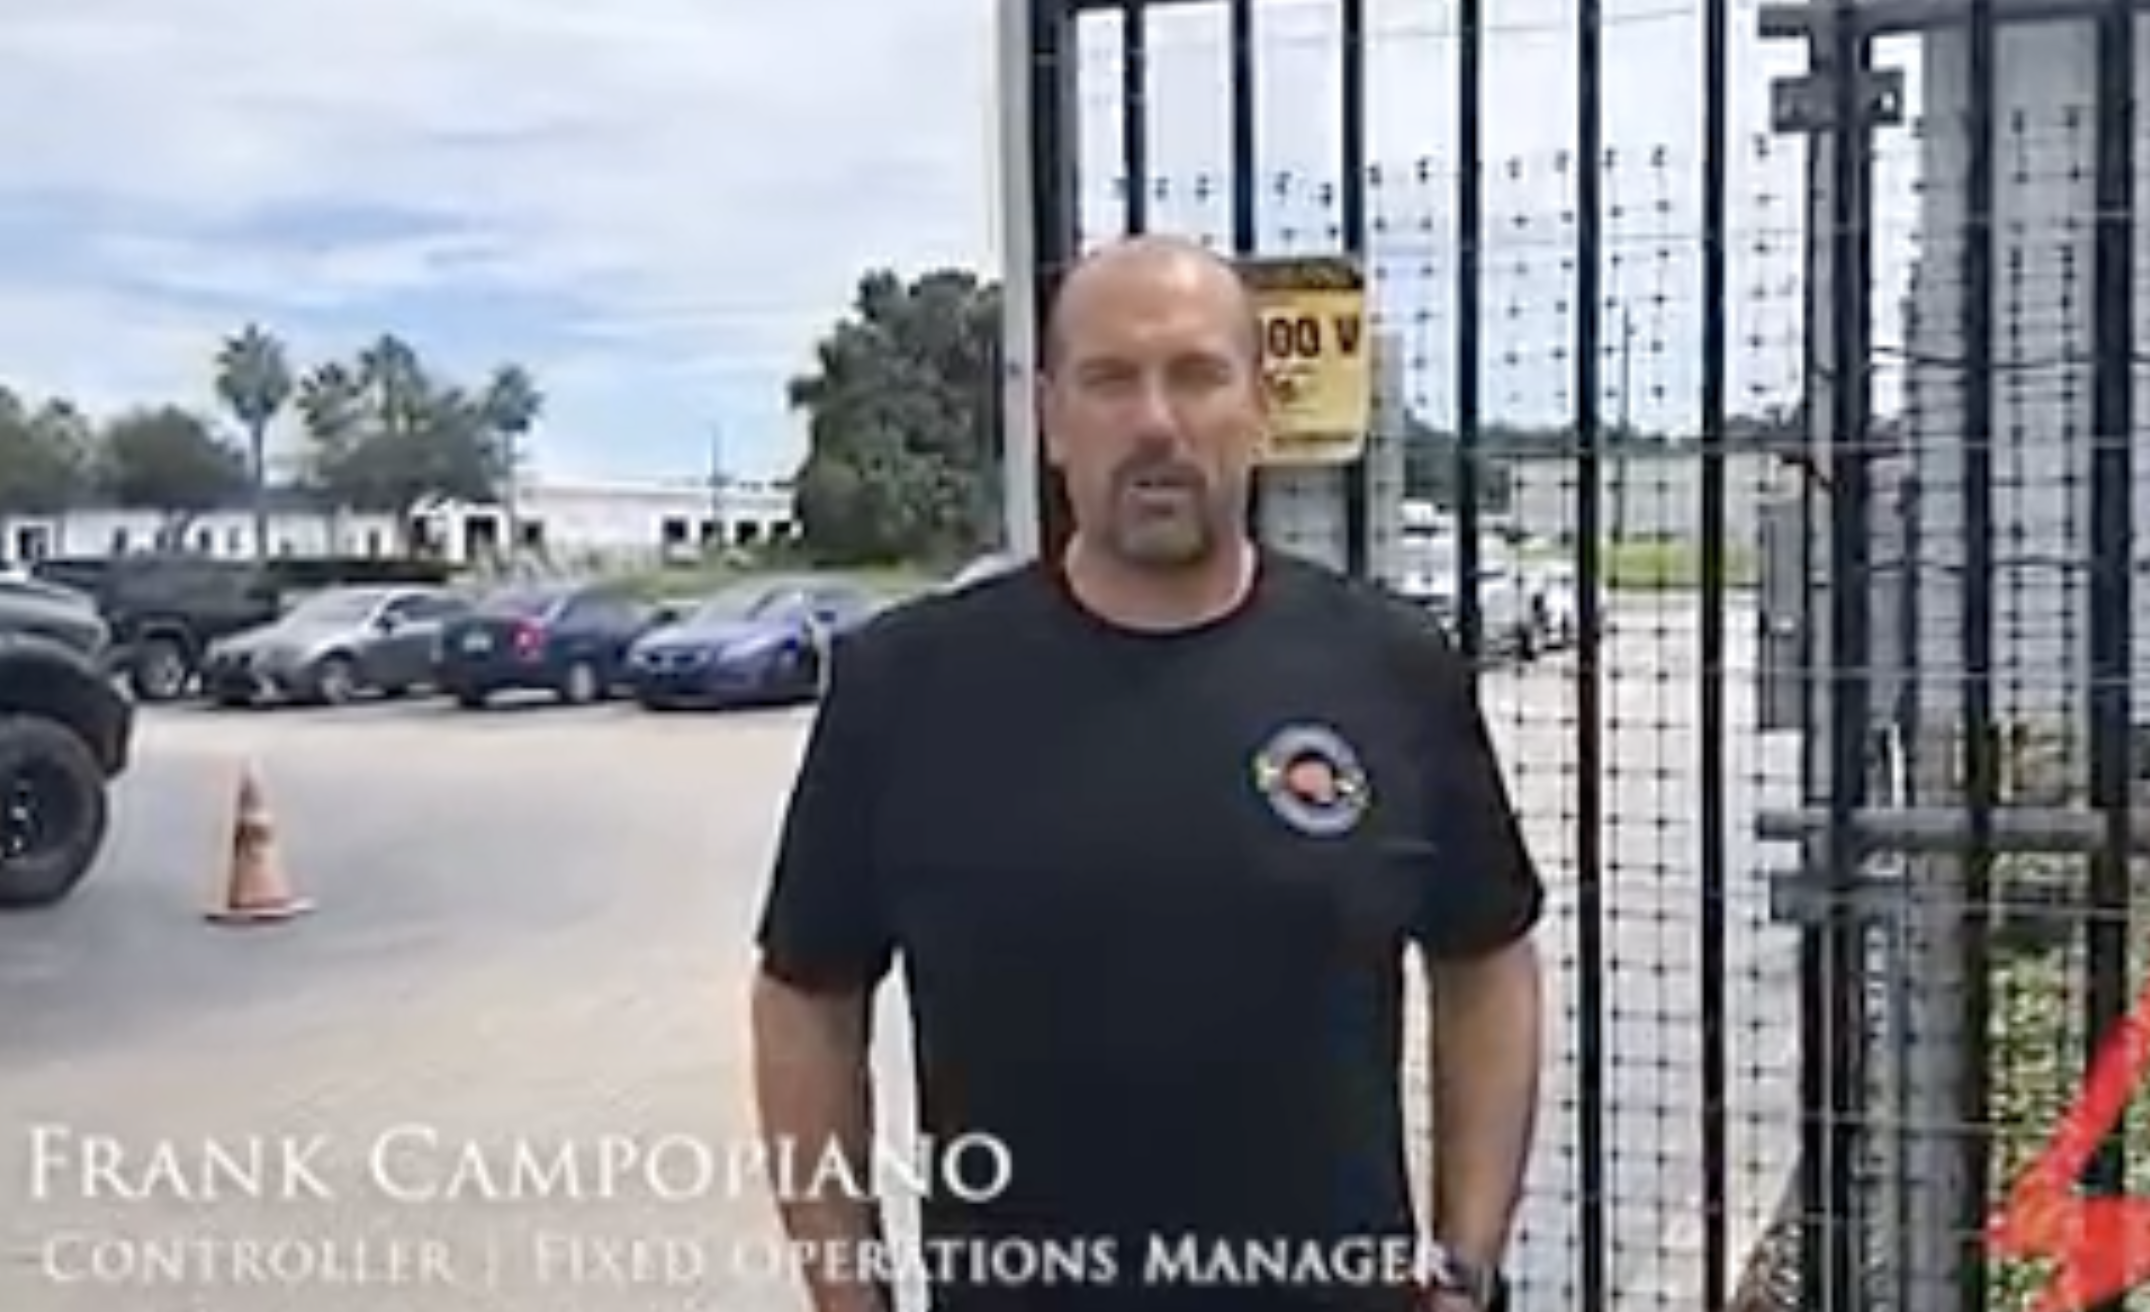 Frank Campopiano - Fixed Operations Manager - Testimonial